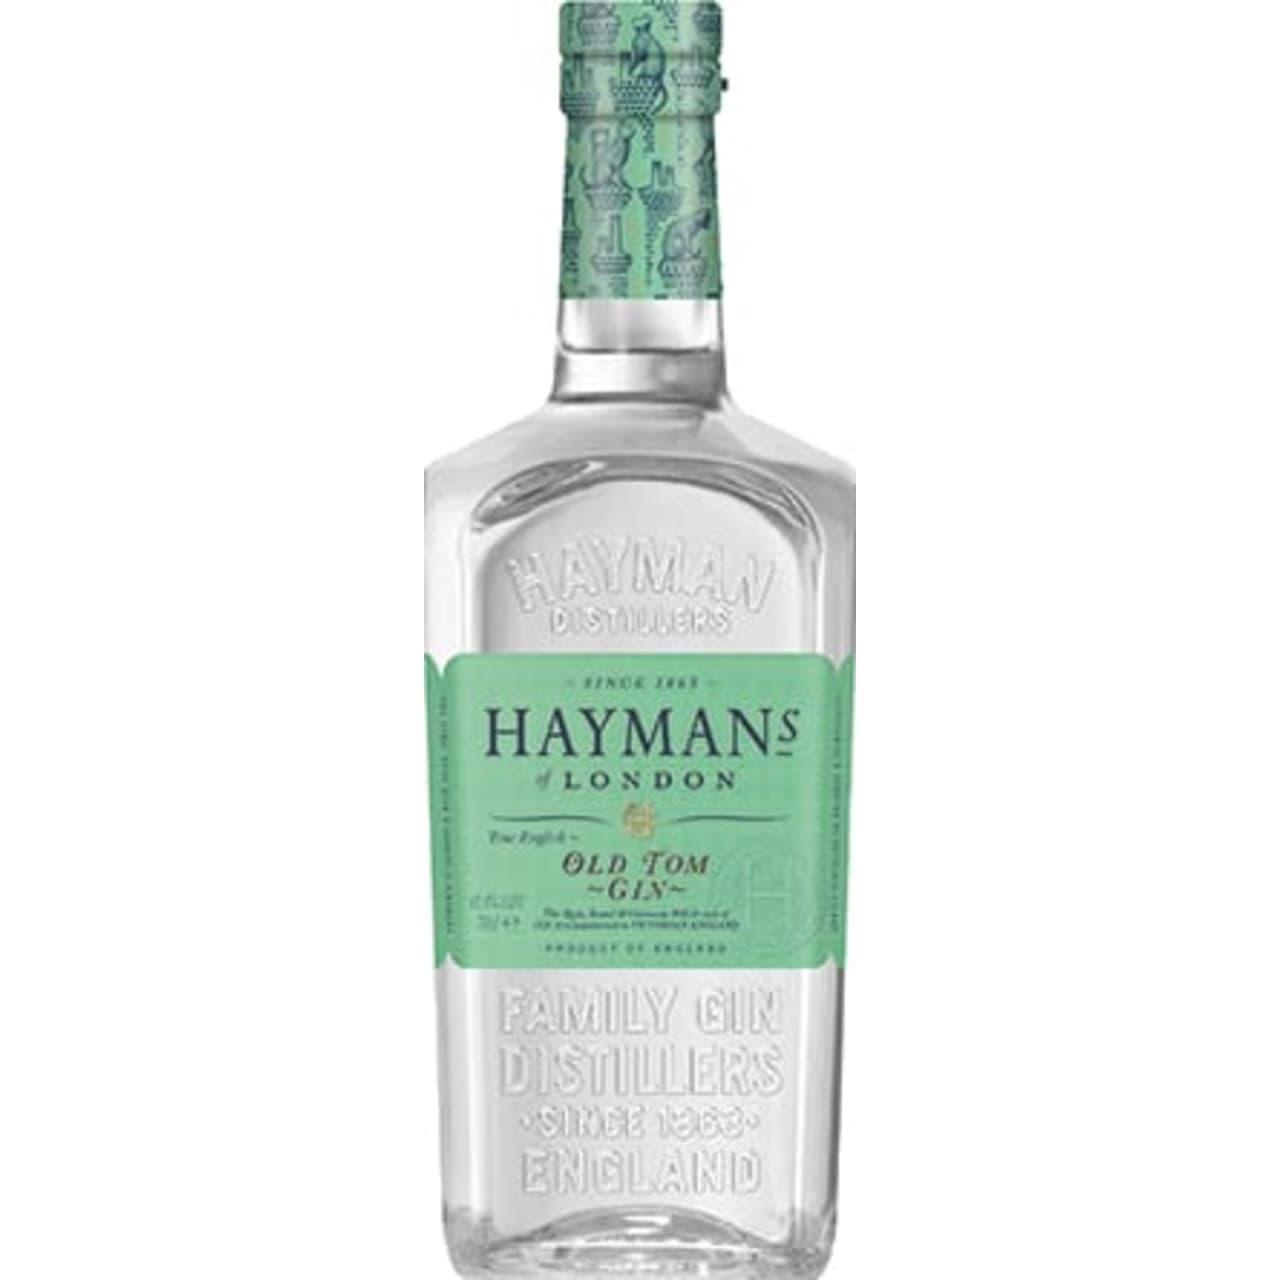 Many people are unfamiliar with True English Old Tom Gin. Dating back to a period when gin was more richly flavoured, it remains a family favourite to this day. The gloriously generous quantities of botanicals used in Haymans family recipe create a bold citrus and juniper pine character that is rich and rounded on the palate with a beautifully delicate finish.